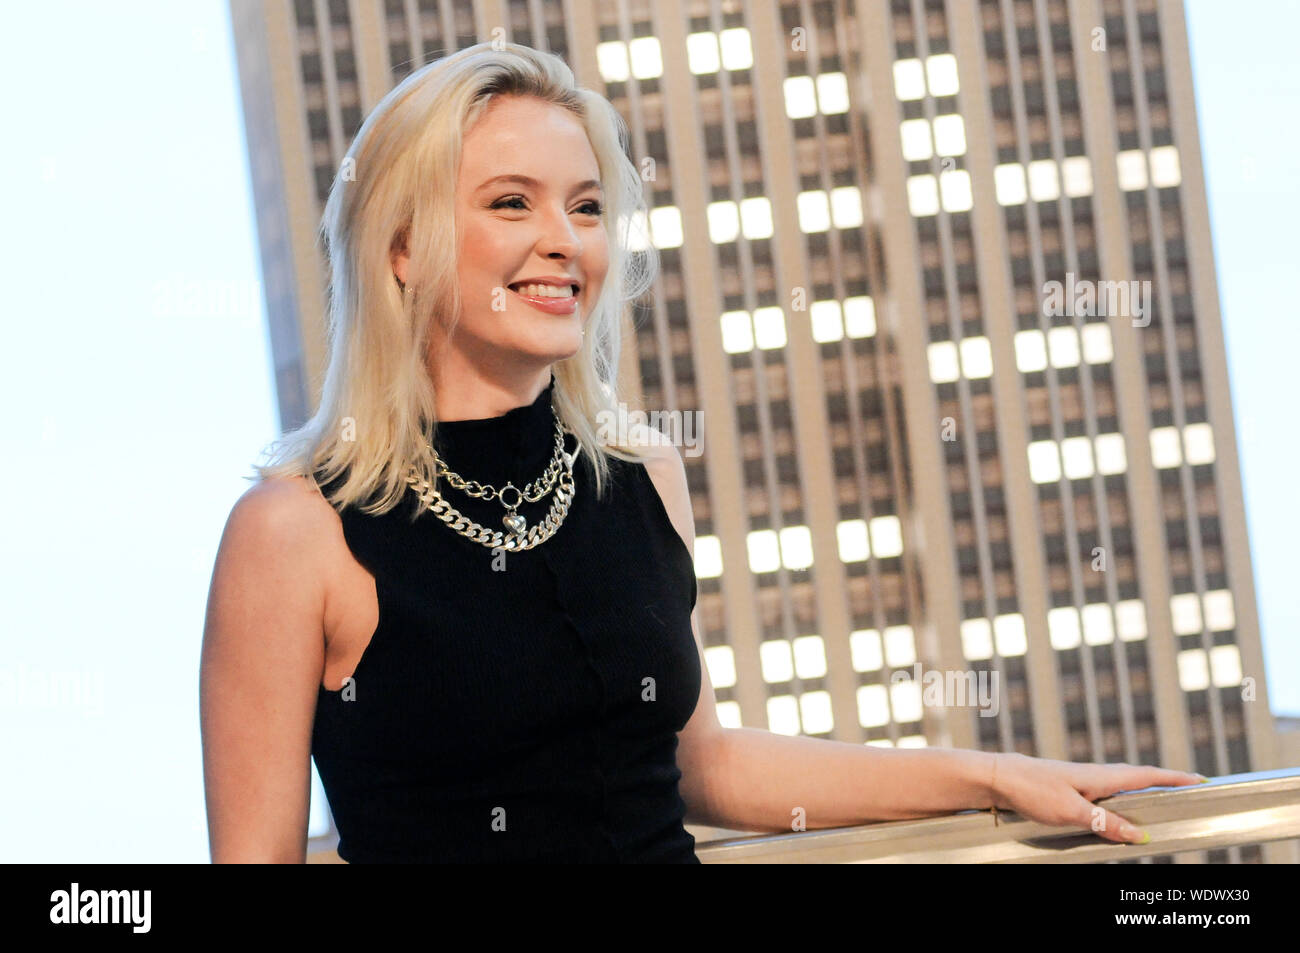 New York City, United States. 29th Aug, 2019. Recording artist Zara Larsson  visits the Empire State Building in New York City while in town to host the  MTV VMA Red Carpet. Credit: